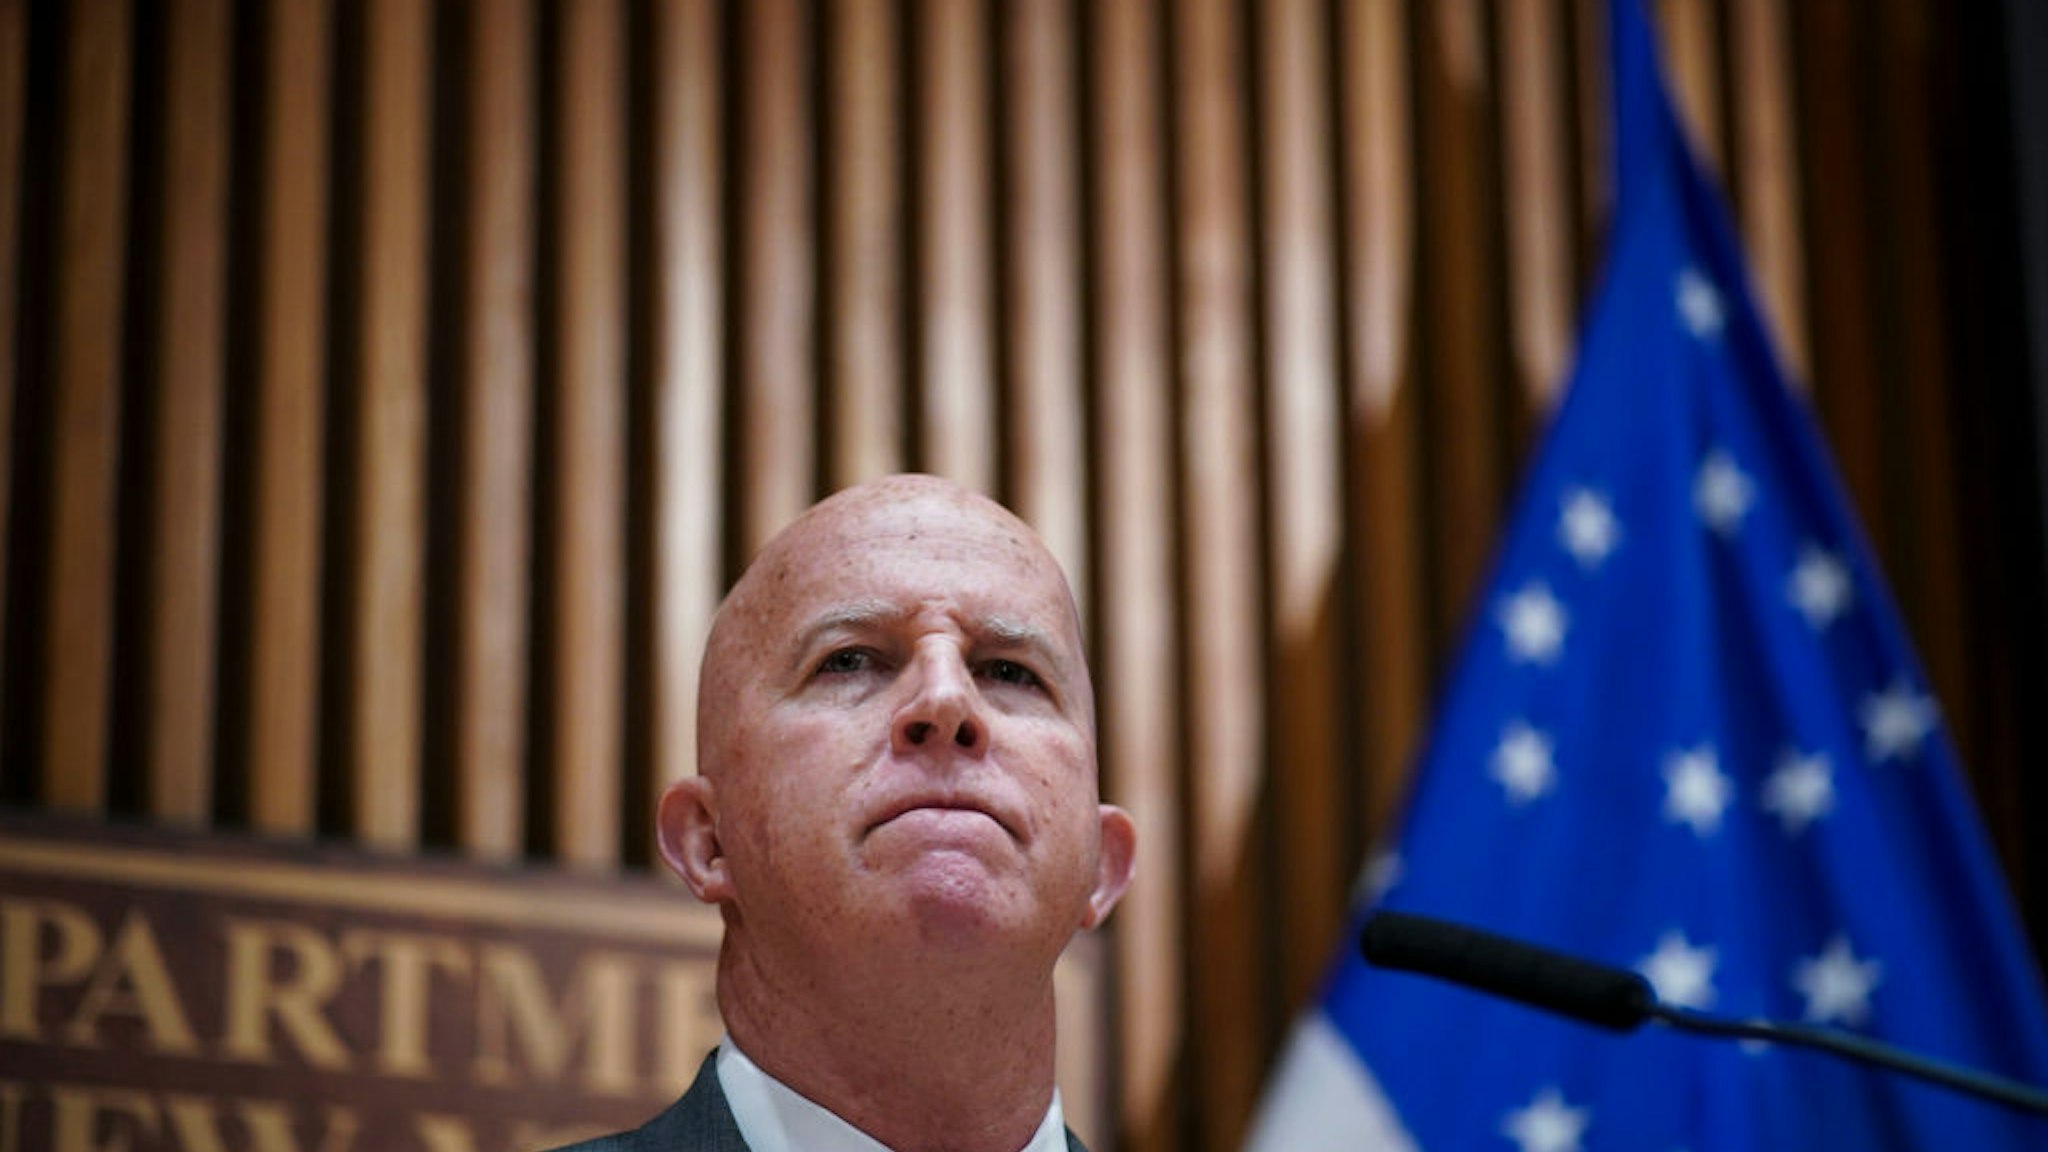 New York City Police Commissioner James O'Neill speaks during a press conference to announce the termination of officer Daniel Pantaleo on August 19, 2019 in New York City. Officer Pantaleo has been fired from the NYPD after his involvement in a chokehold related death of Eric Garner in 2014.